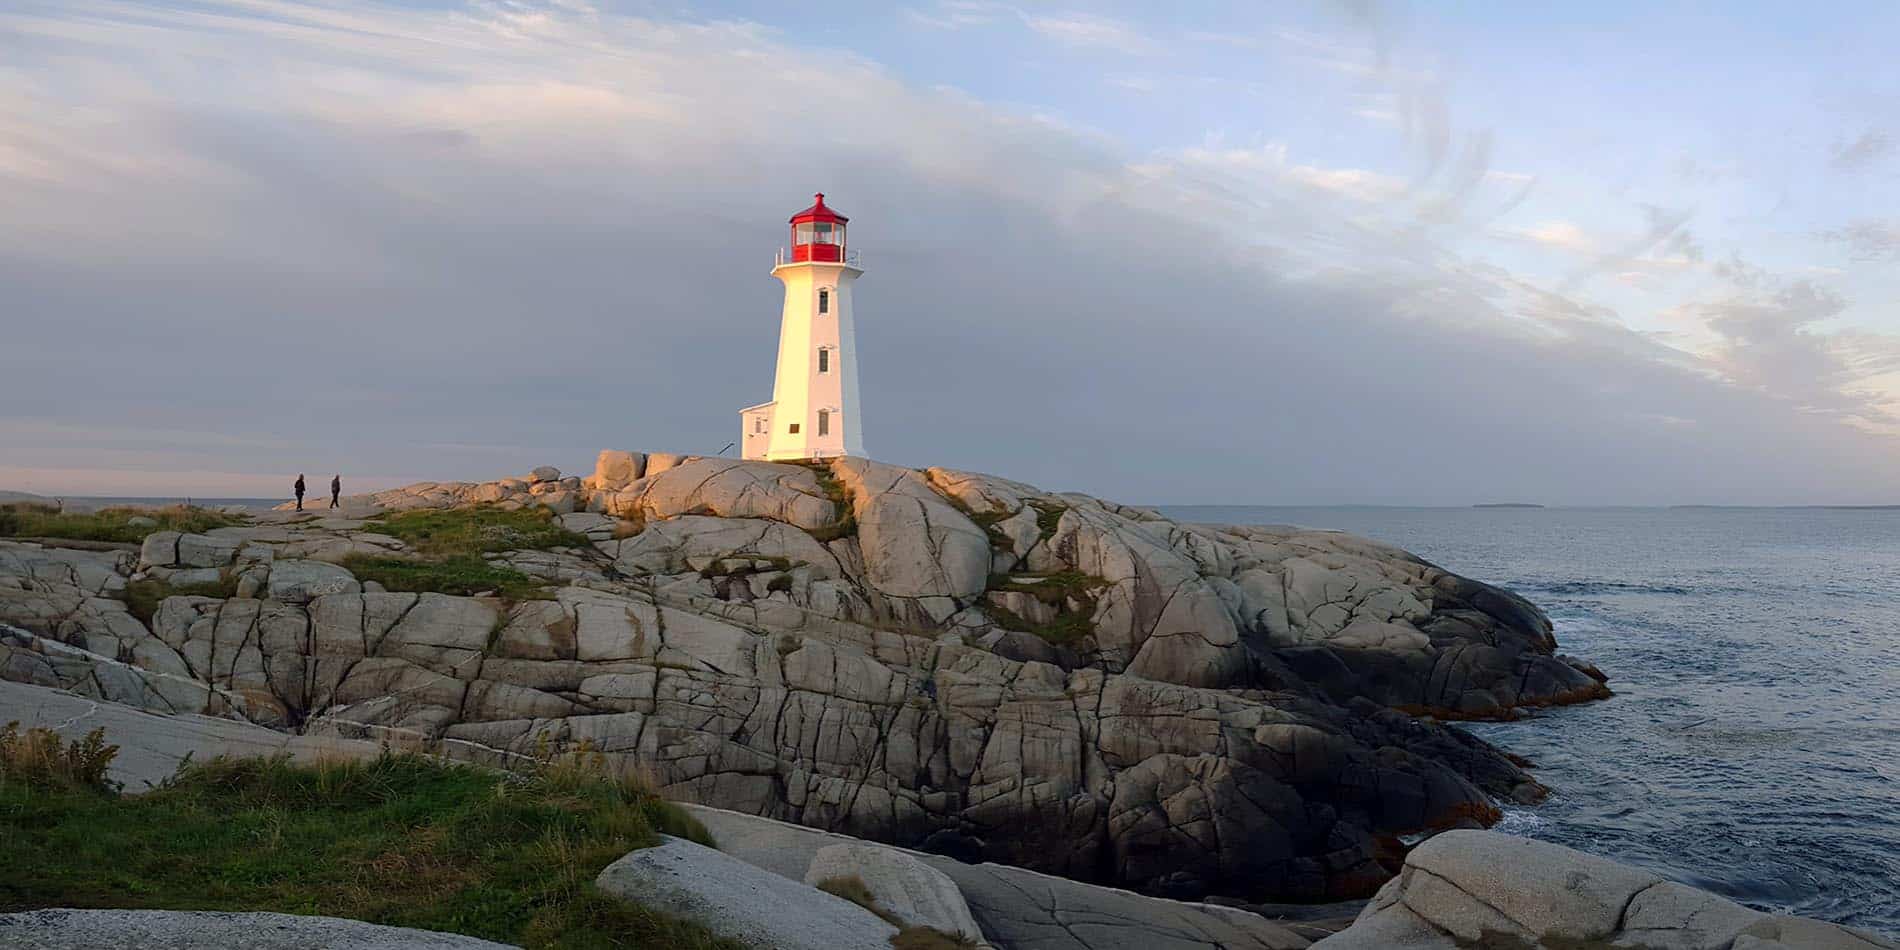 Peggy's Cove lighthouse in morning light - image by Picture Perfect Tours and Geordie Mott